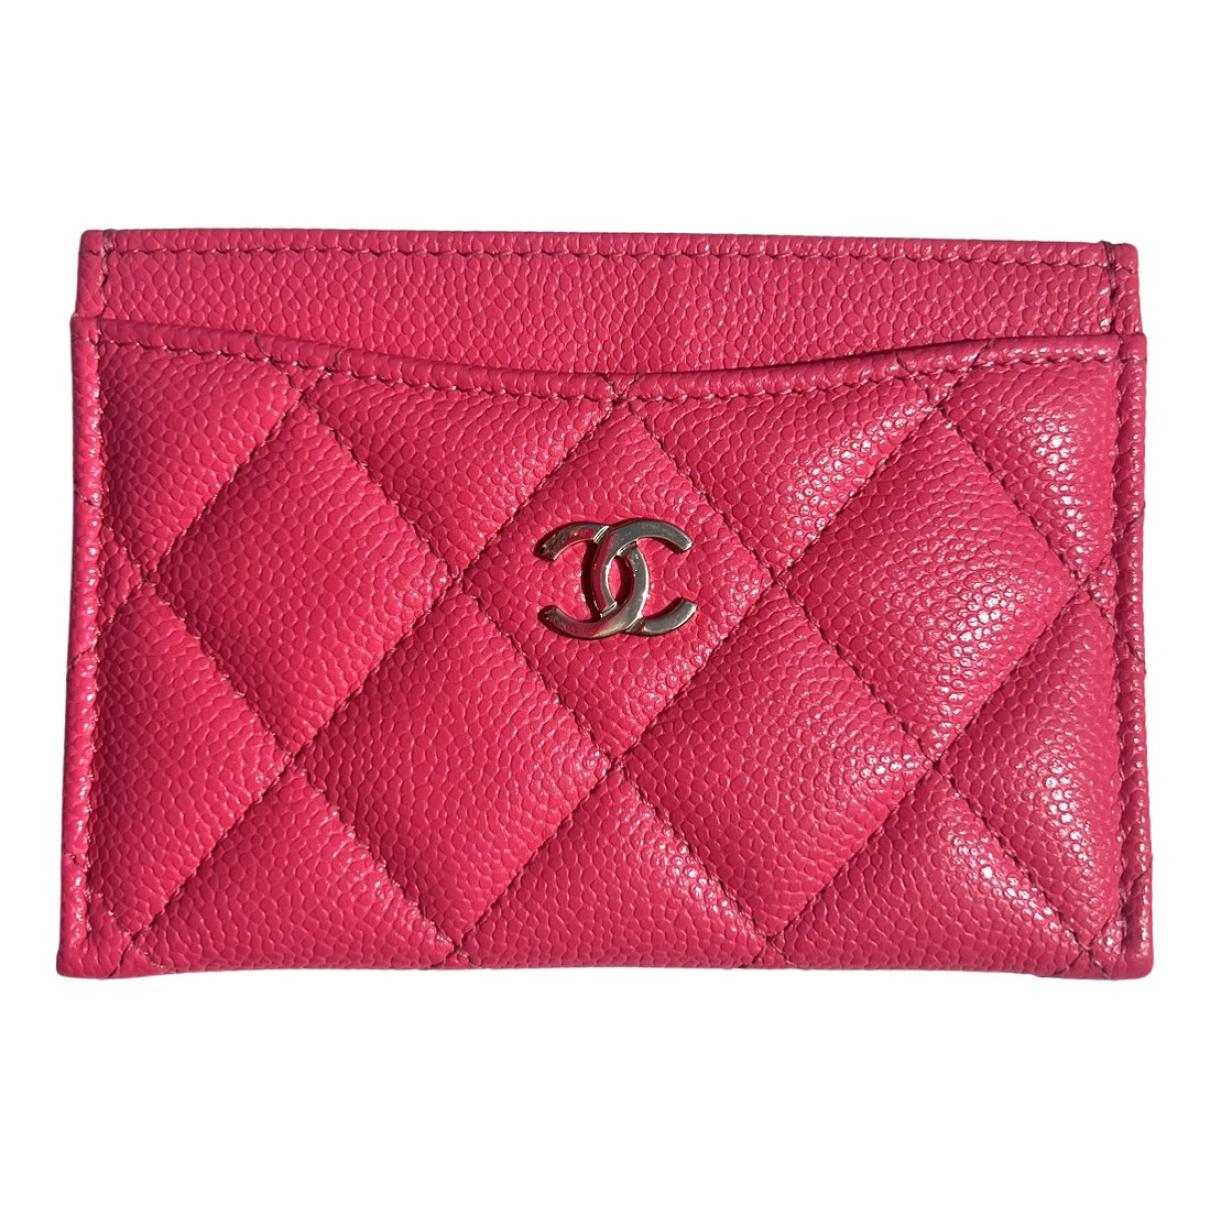 Timeless/classique leather backpack Chanel Pink in Leather - 21266765